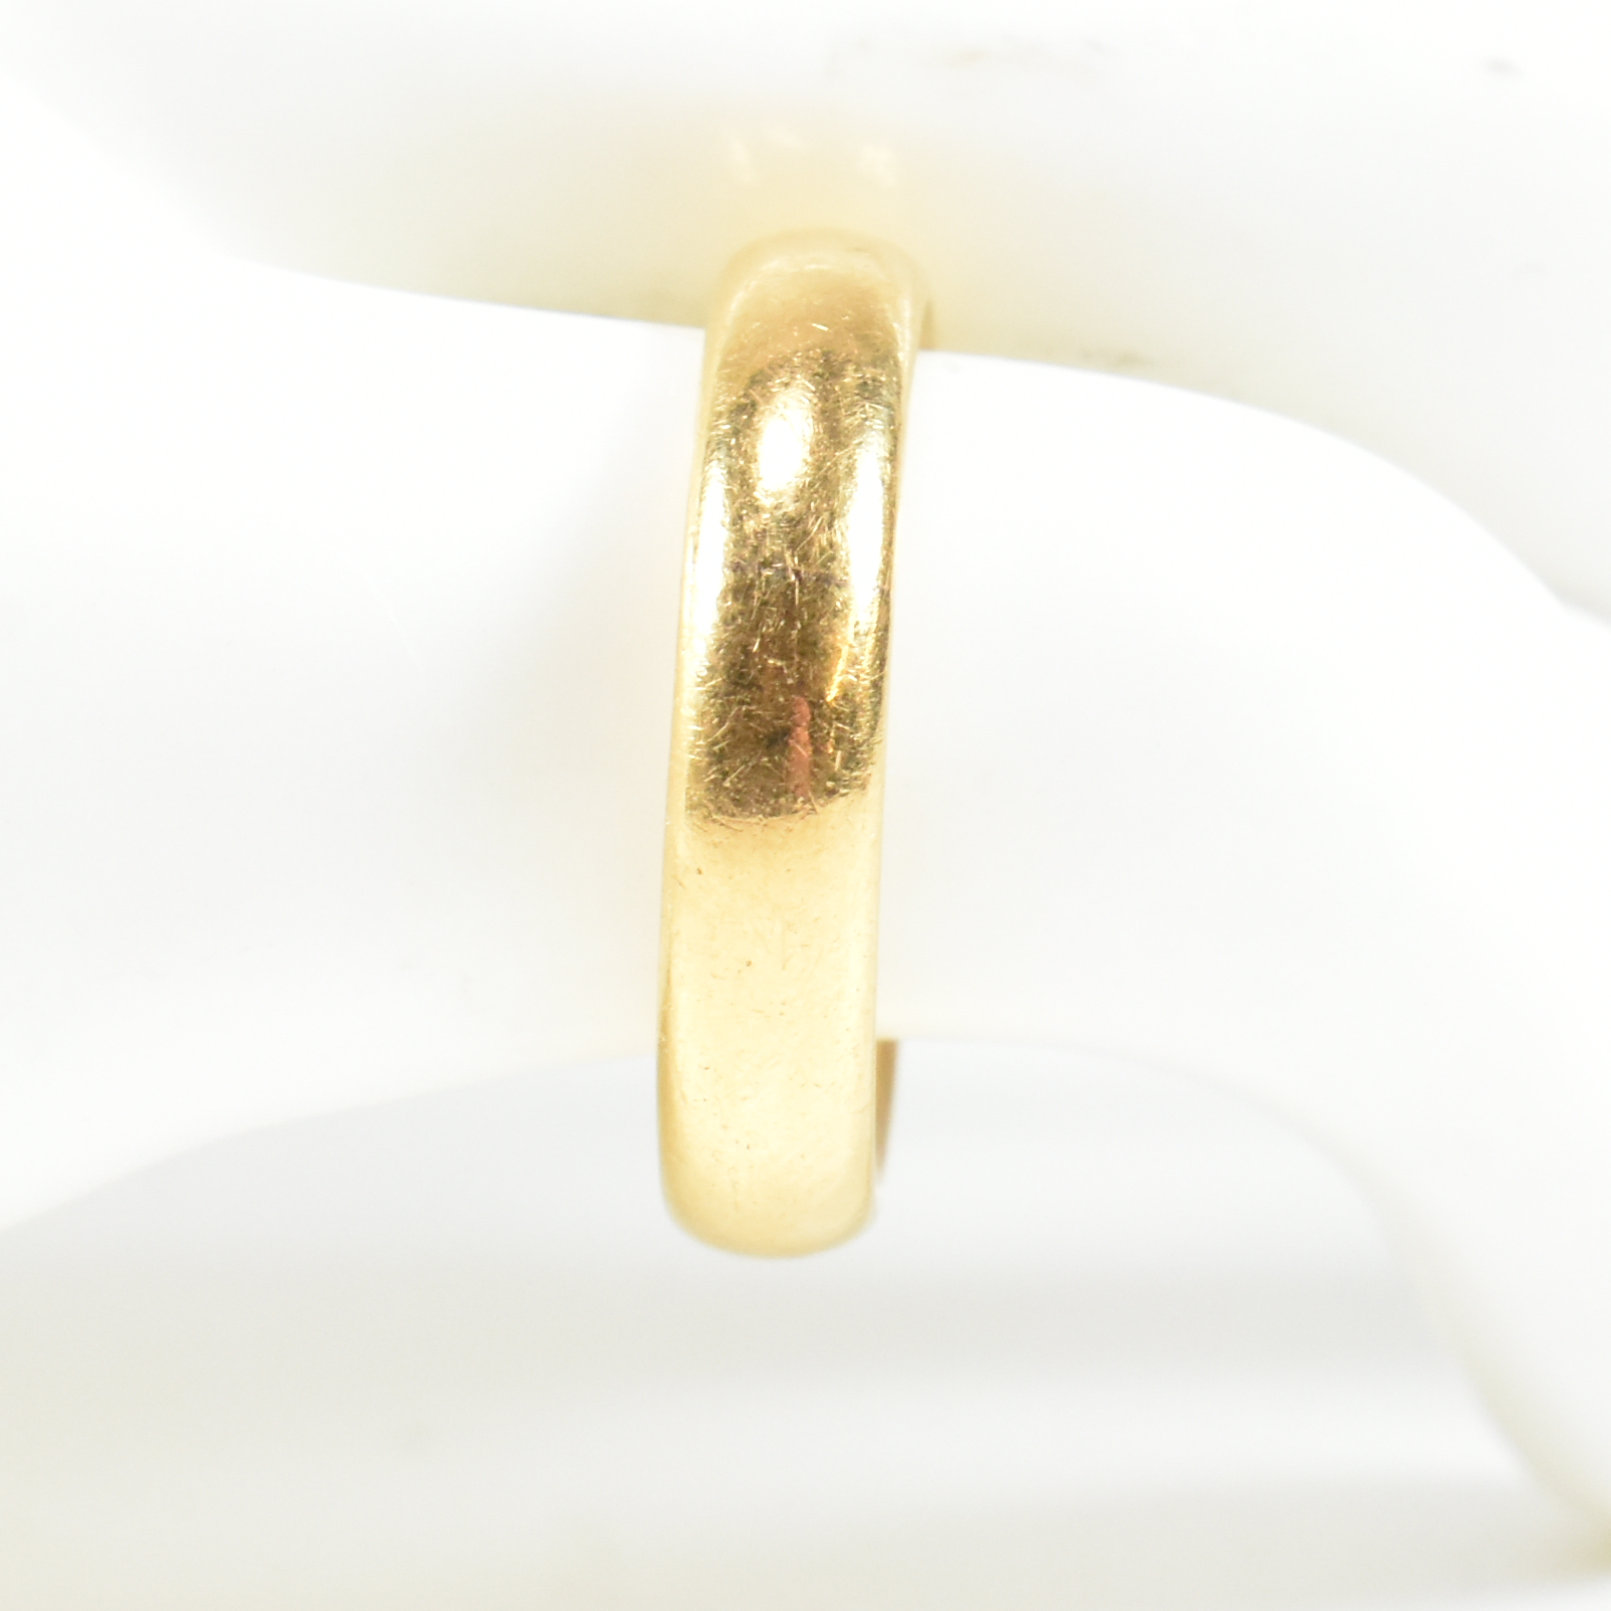 HALLMARKED 22CT GOLD BAND RING - Image 6 of 6